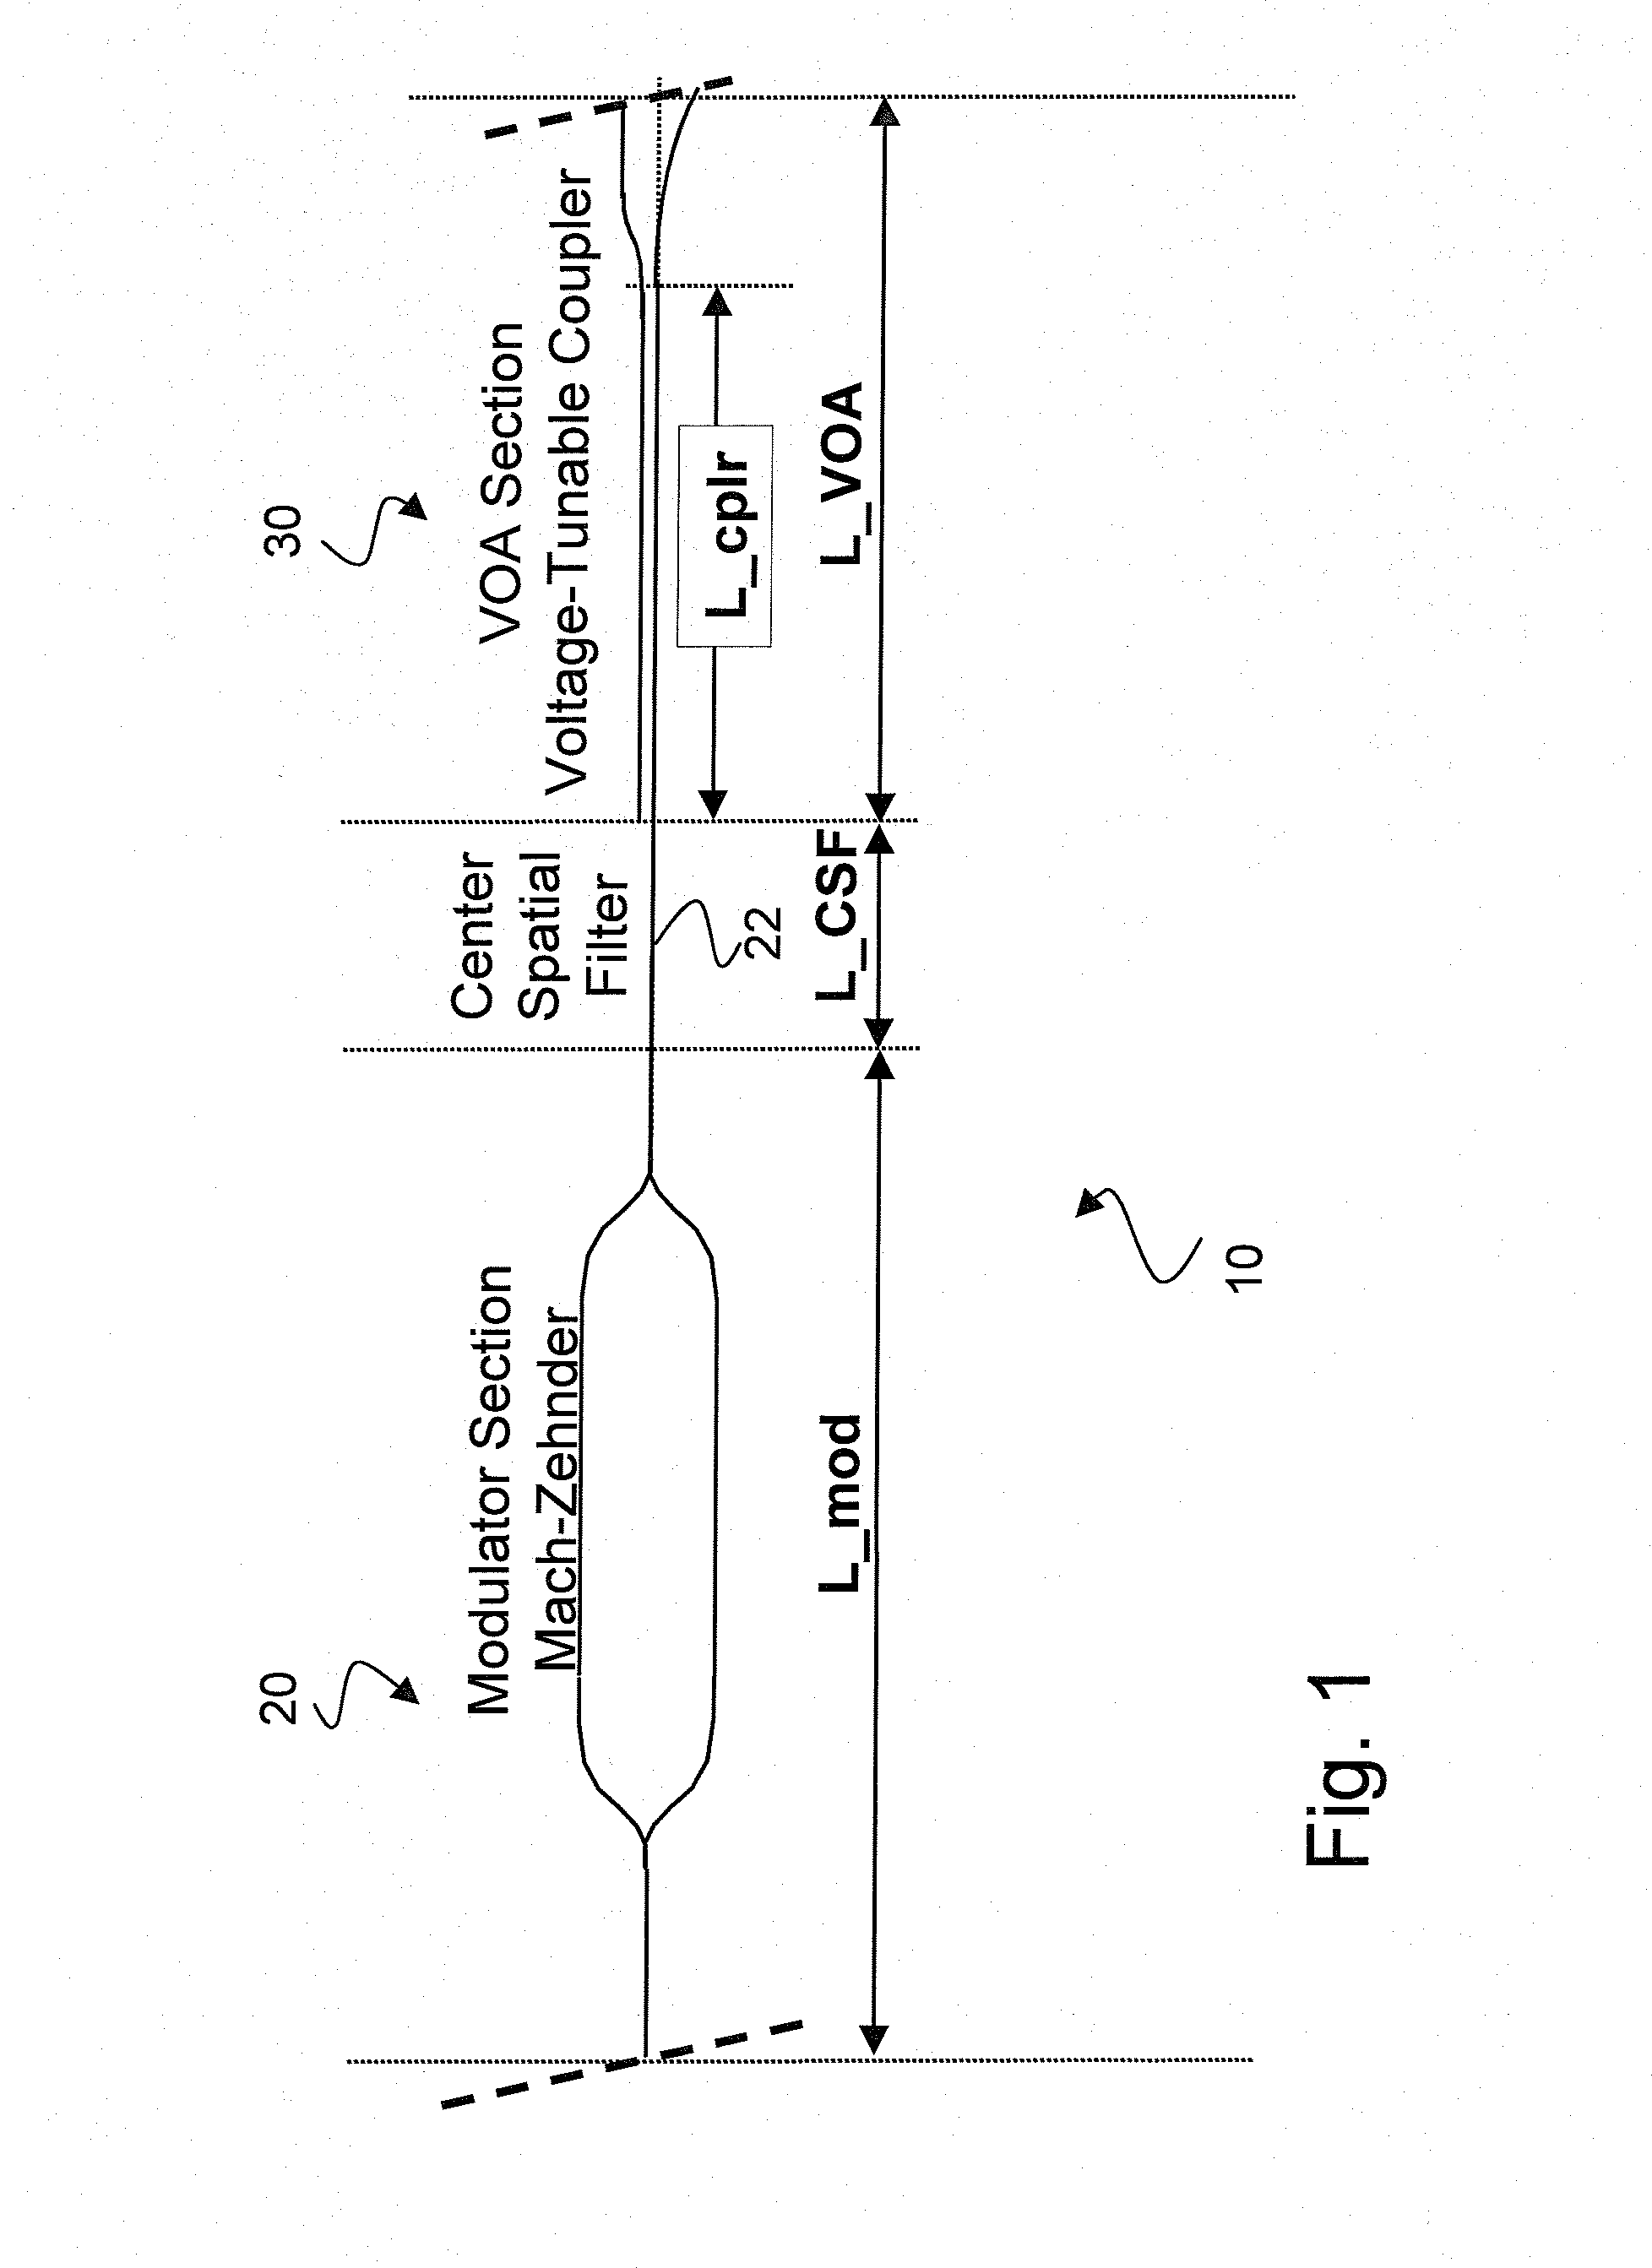 Asymmetric directional coupler having a reduced drive voltage